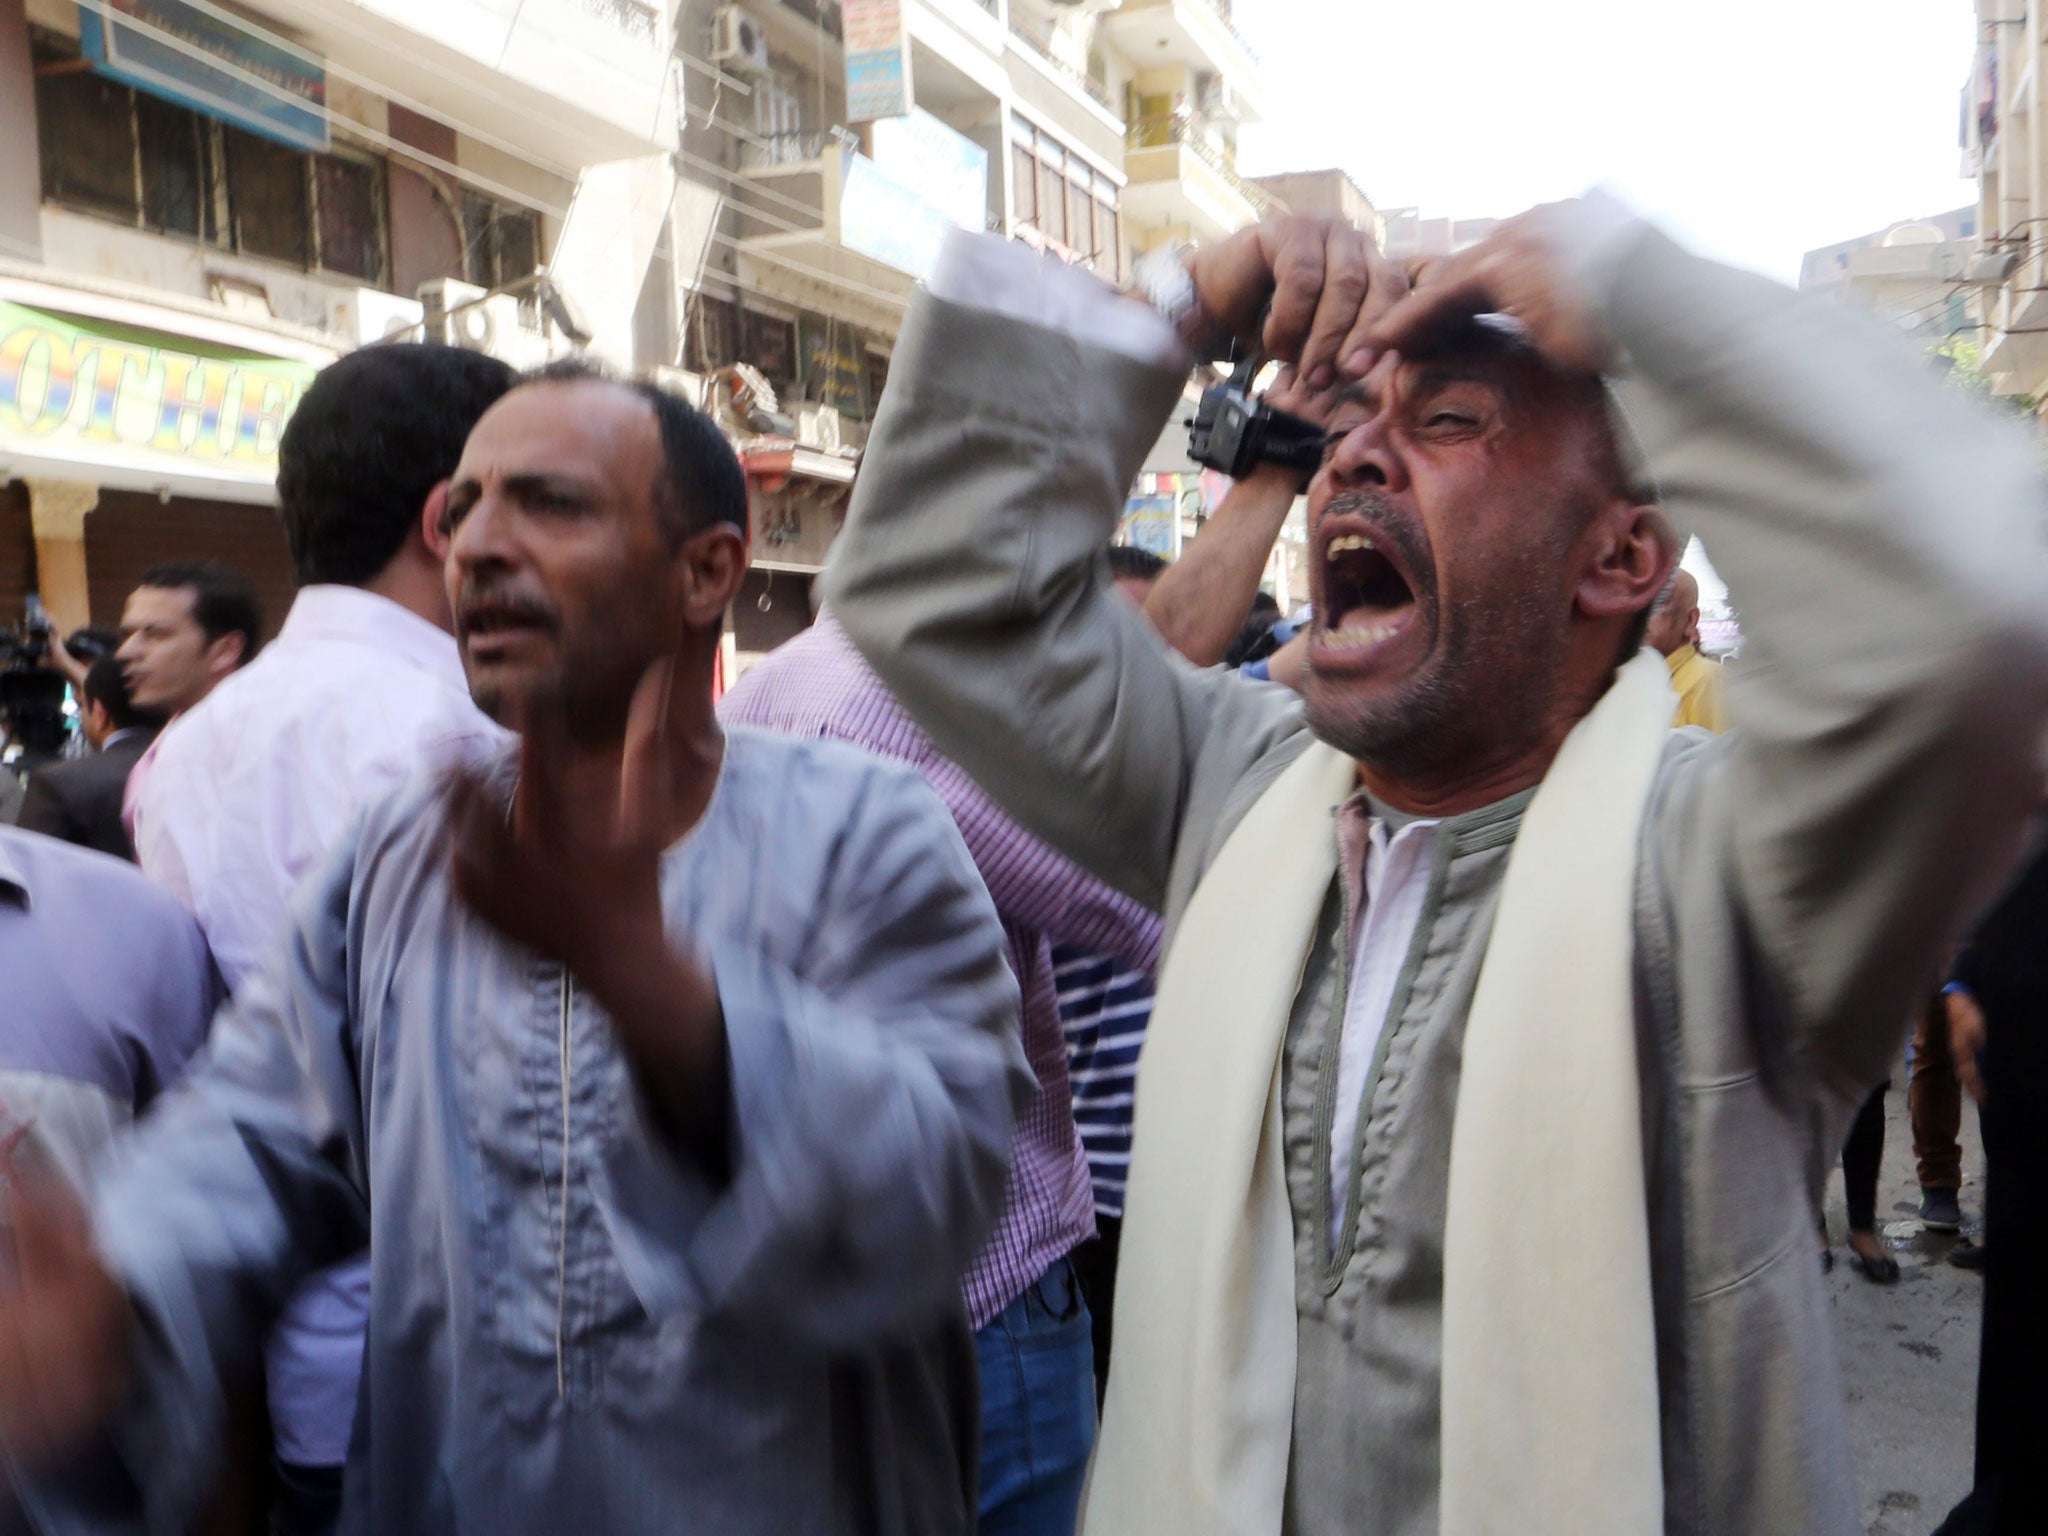 Egyptian relatives react outside a court during the trial of supporters of toppled president Mohamed Morsi in Minya